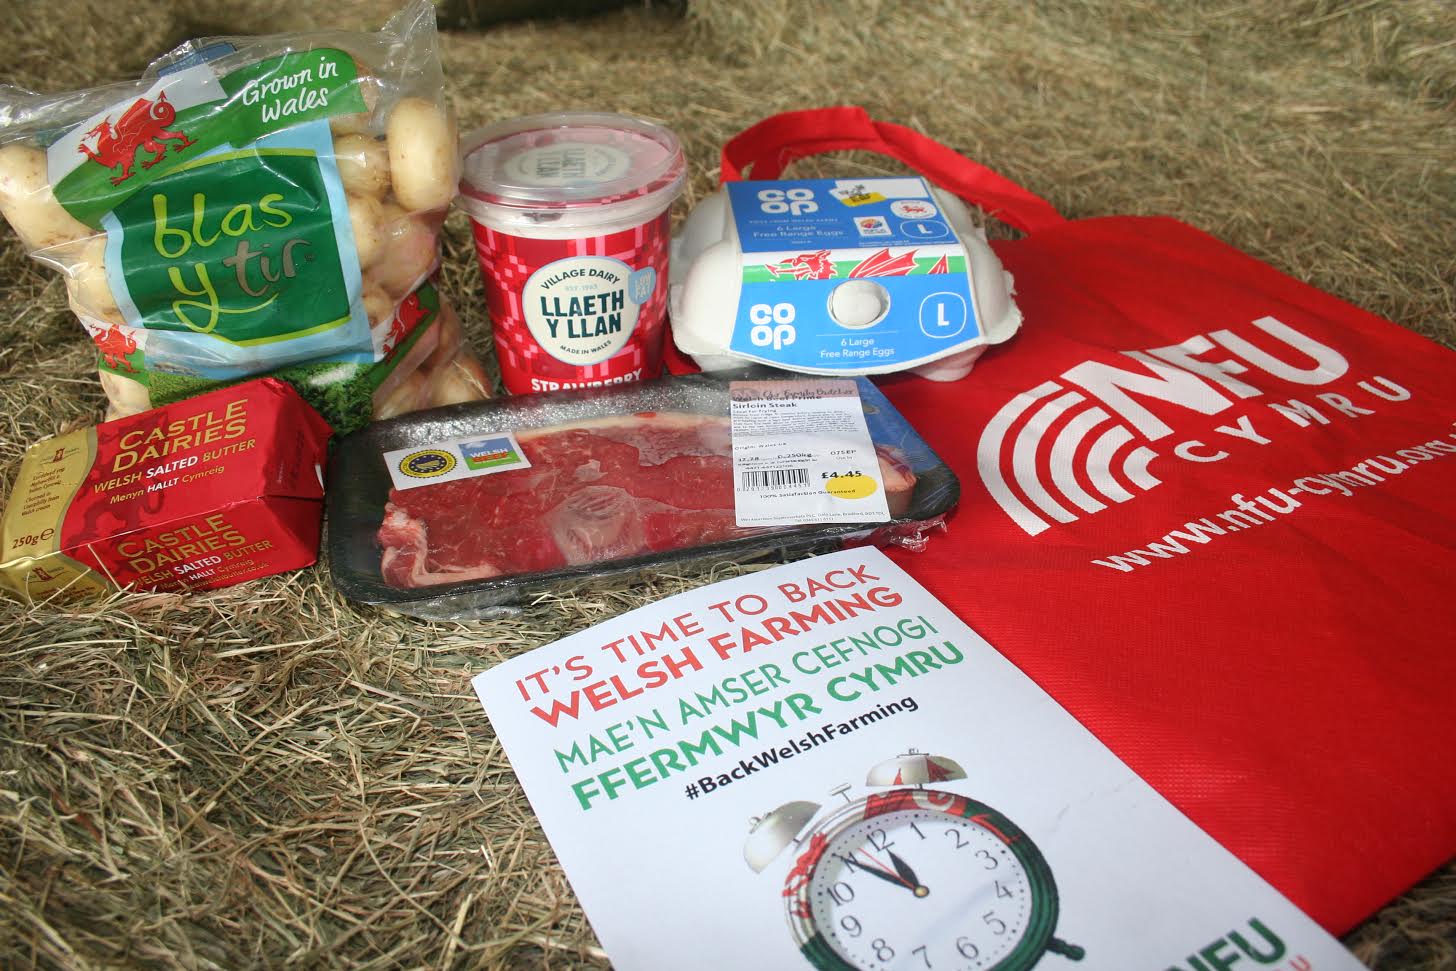 NFU Cymru says 'It's time to back Welsh farming' with the #Buy5 initiative